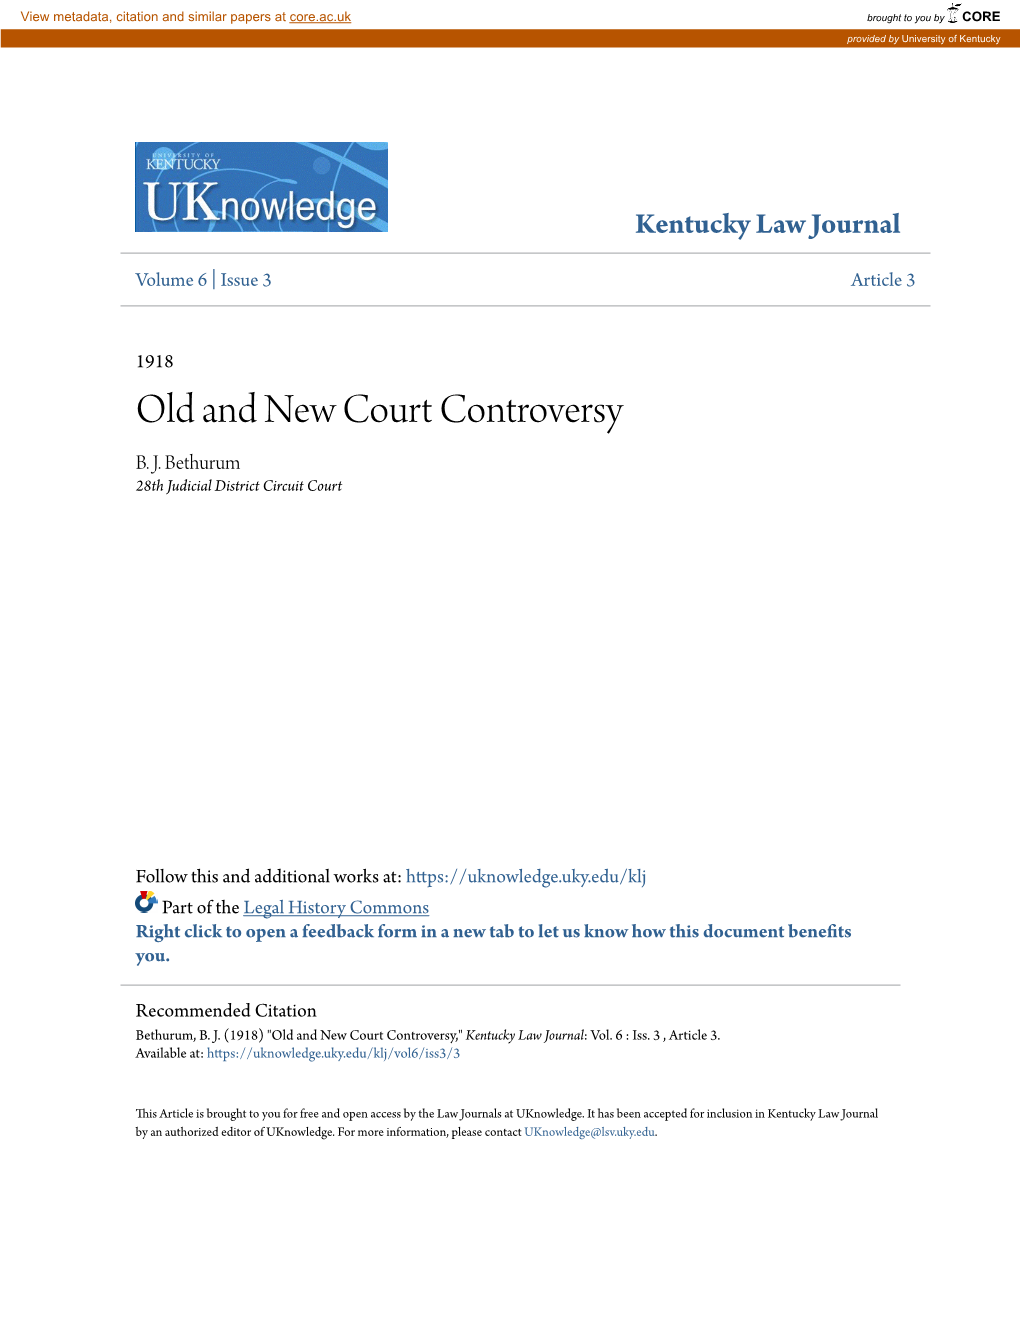 Old and New Court Controversy B